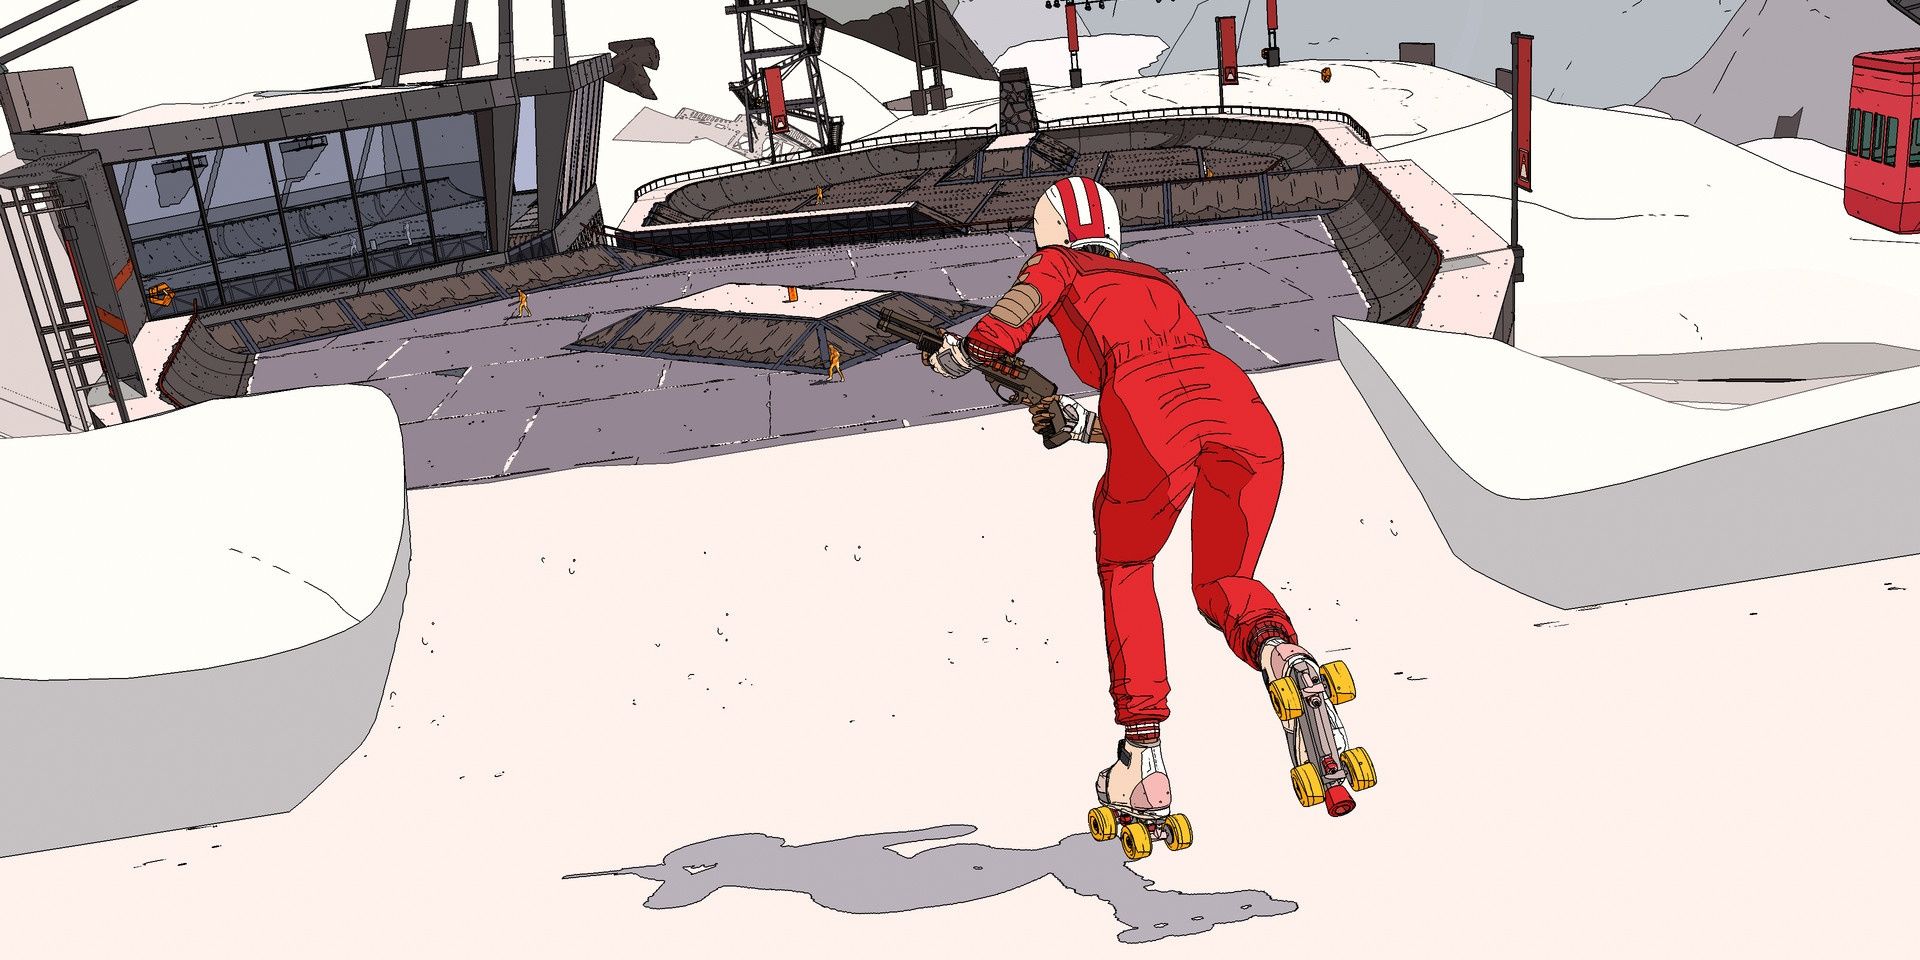 Rollerdrome - skating downhill in a snowy arena